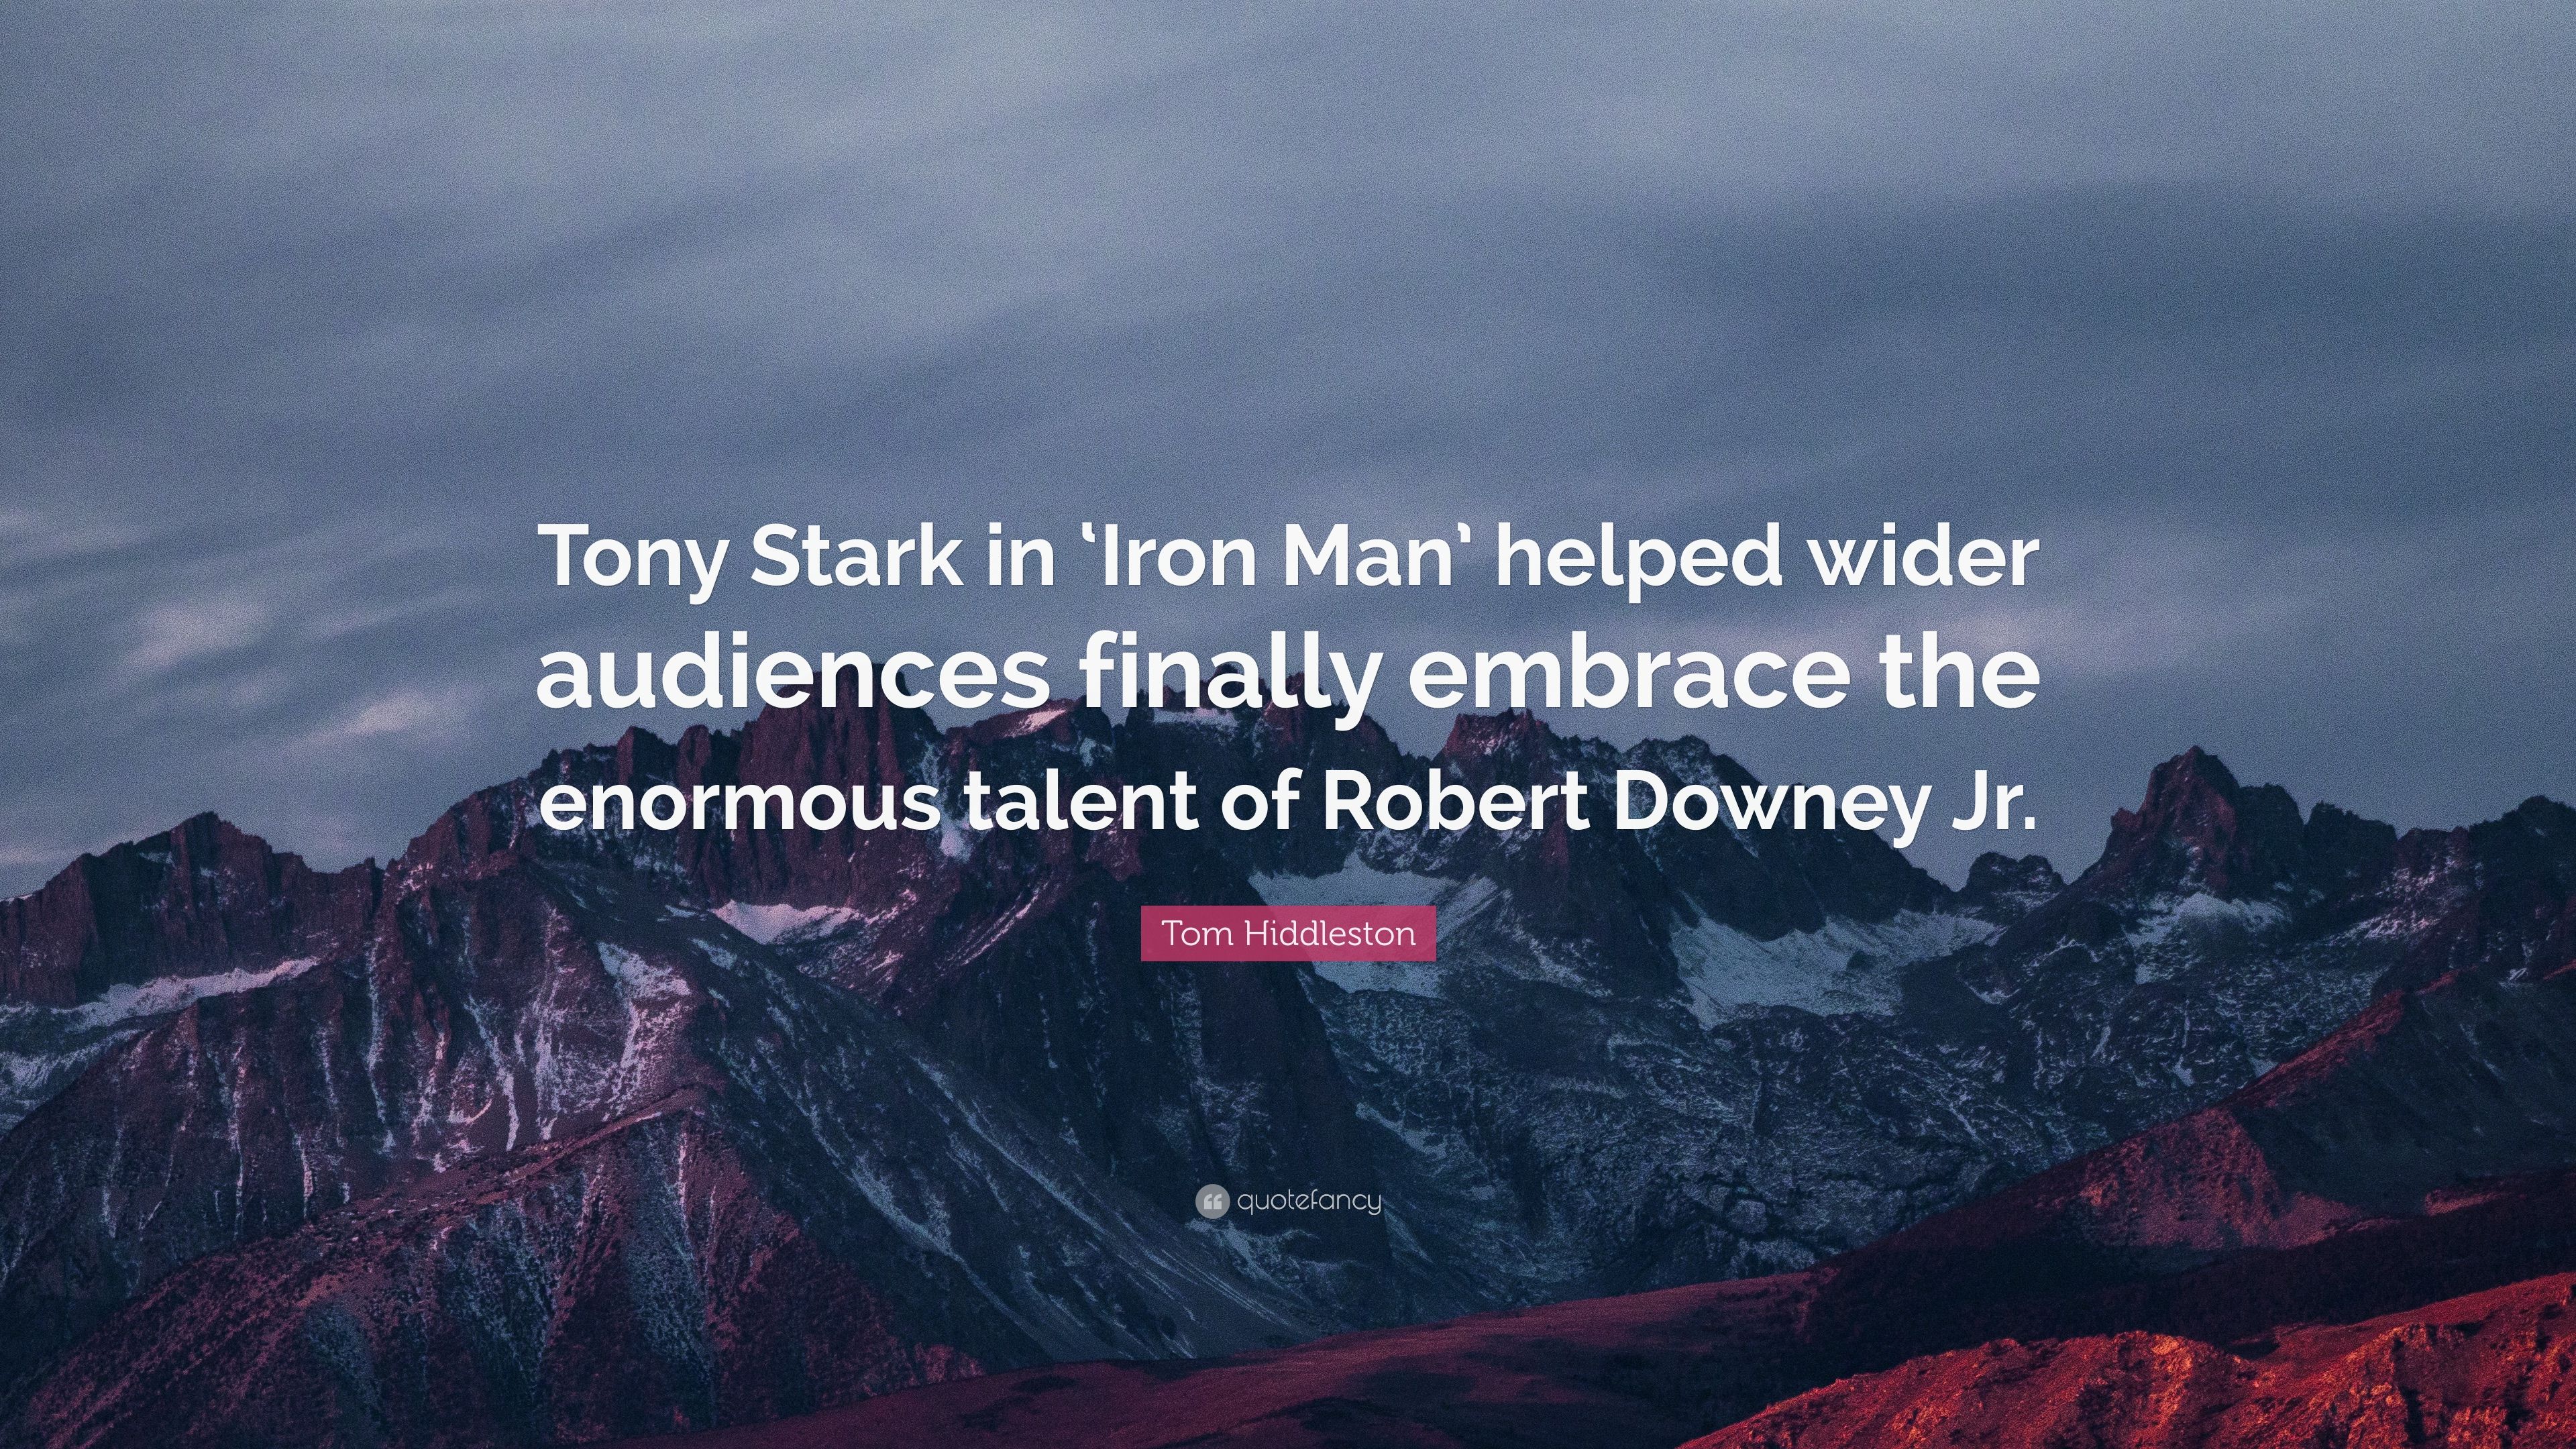 Tom Hiddleston Quote: “Tony Stark in 'Iron Man' helped wider audiences finally embrace the enormous talent of Robert Downey Jr.” (7 wallpaper)